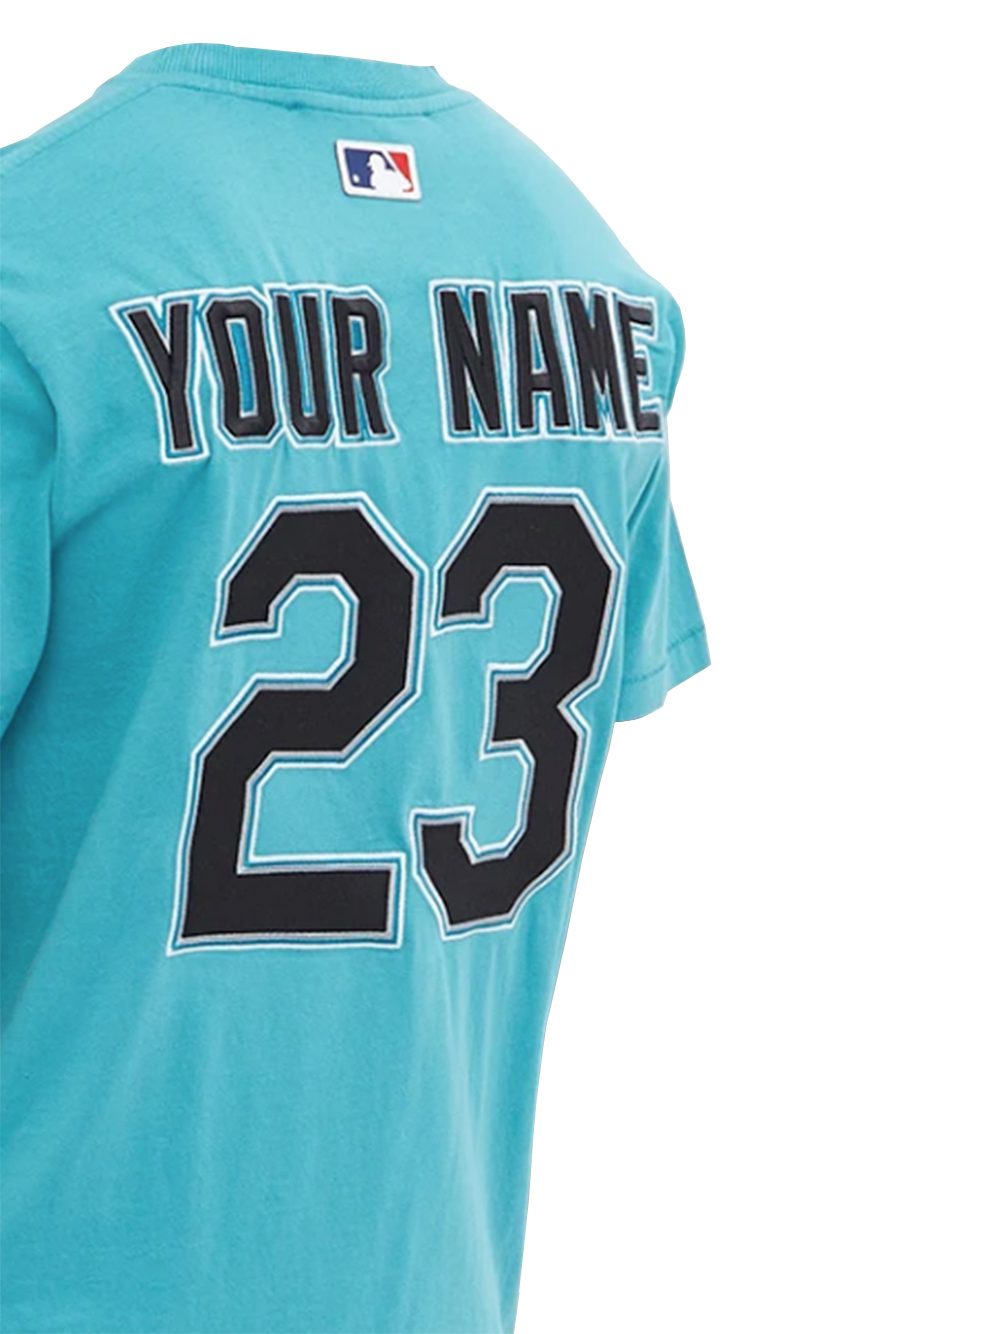 Off-White Miami Marlins cut-out shirt - Grey